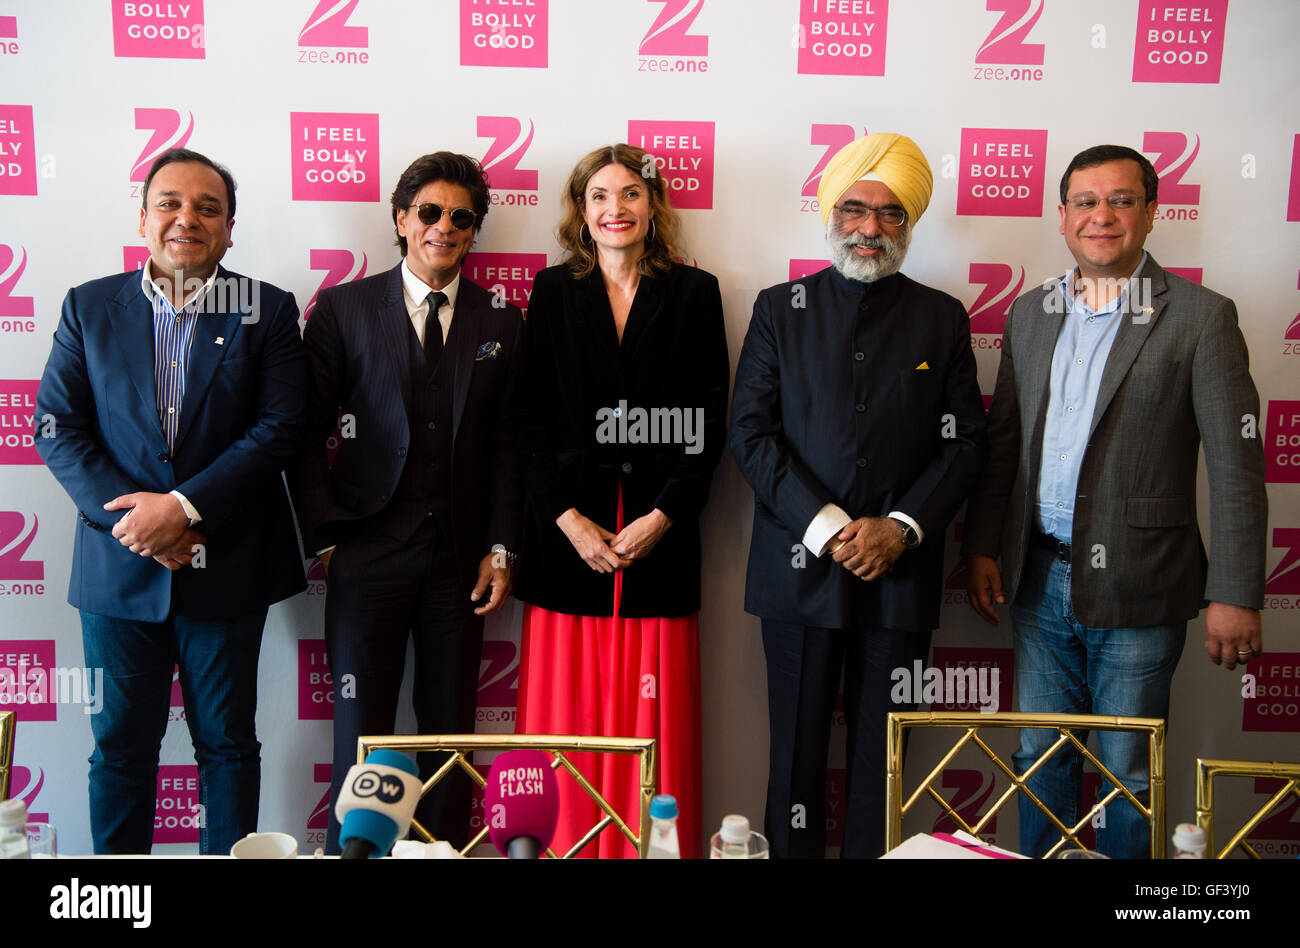 Munich, Germany. 28th July, 2016. Punit Goenka (L-R), CEO of Zee Entertainment Enterprises Limited, Bollywood actor Shah Rukh Khan, Friederike Behrends, head of the channel Zee.One and CEO of Asia TV GmbH (Zee TV), Gurjit Singh, Indian Ambassador to Germany, and Amit Goenka, CEO of International Broadcast Business ZEEL pose at a press conference on the presentation of Bollywood channel 'Zee.One' in the Bayerischer Hof hotel in Munich, Germany, 28 July 2016. Photo: MATTHIAS BALK/dpa/Alamy Live News Stock Photo